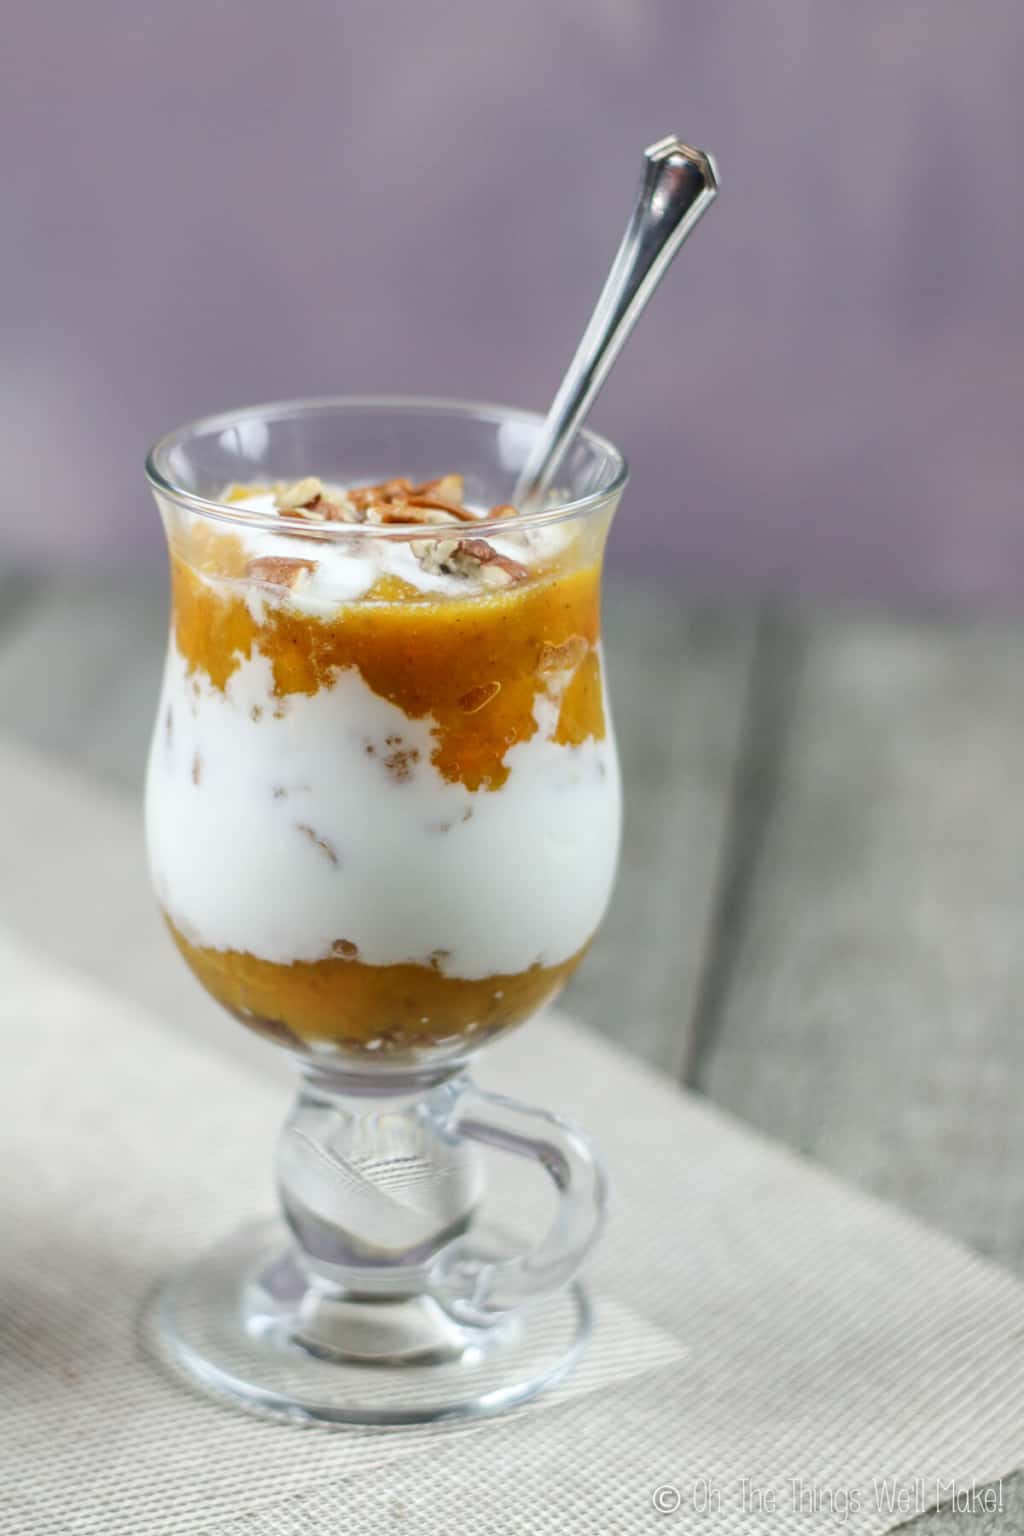 A glass full of pumpkin layered dessert of pumpkin puree and yogurt, topped off with chopped pecans and a silver spoon in it leaning to the side.